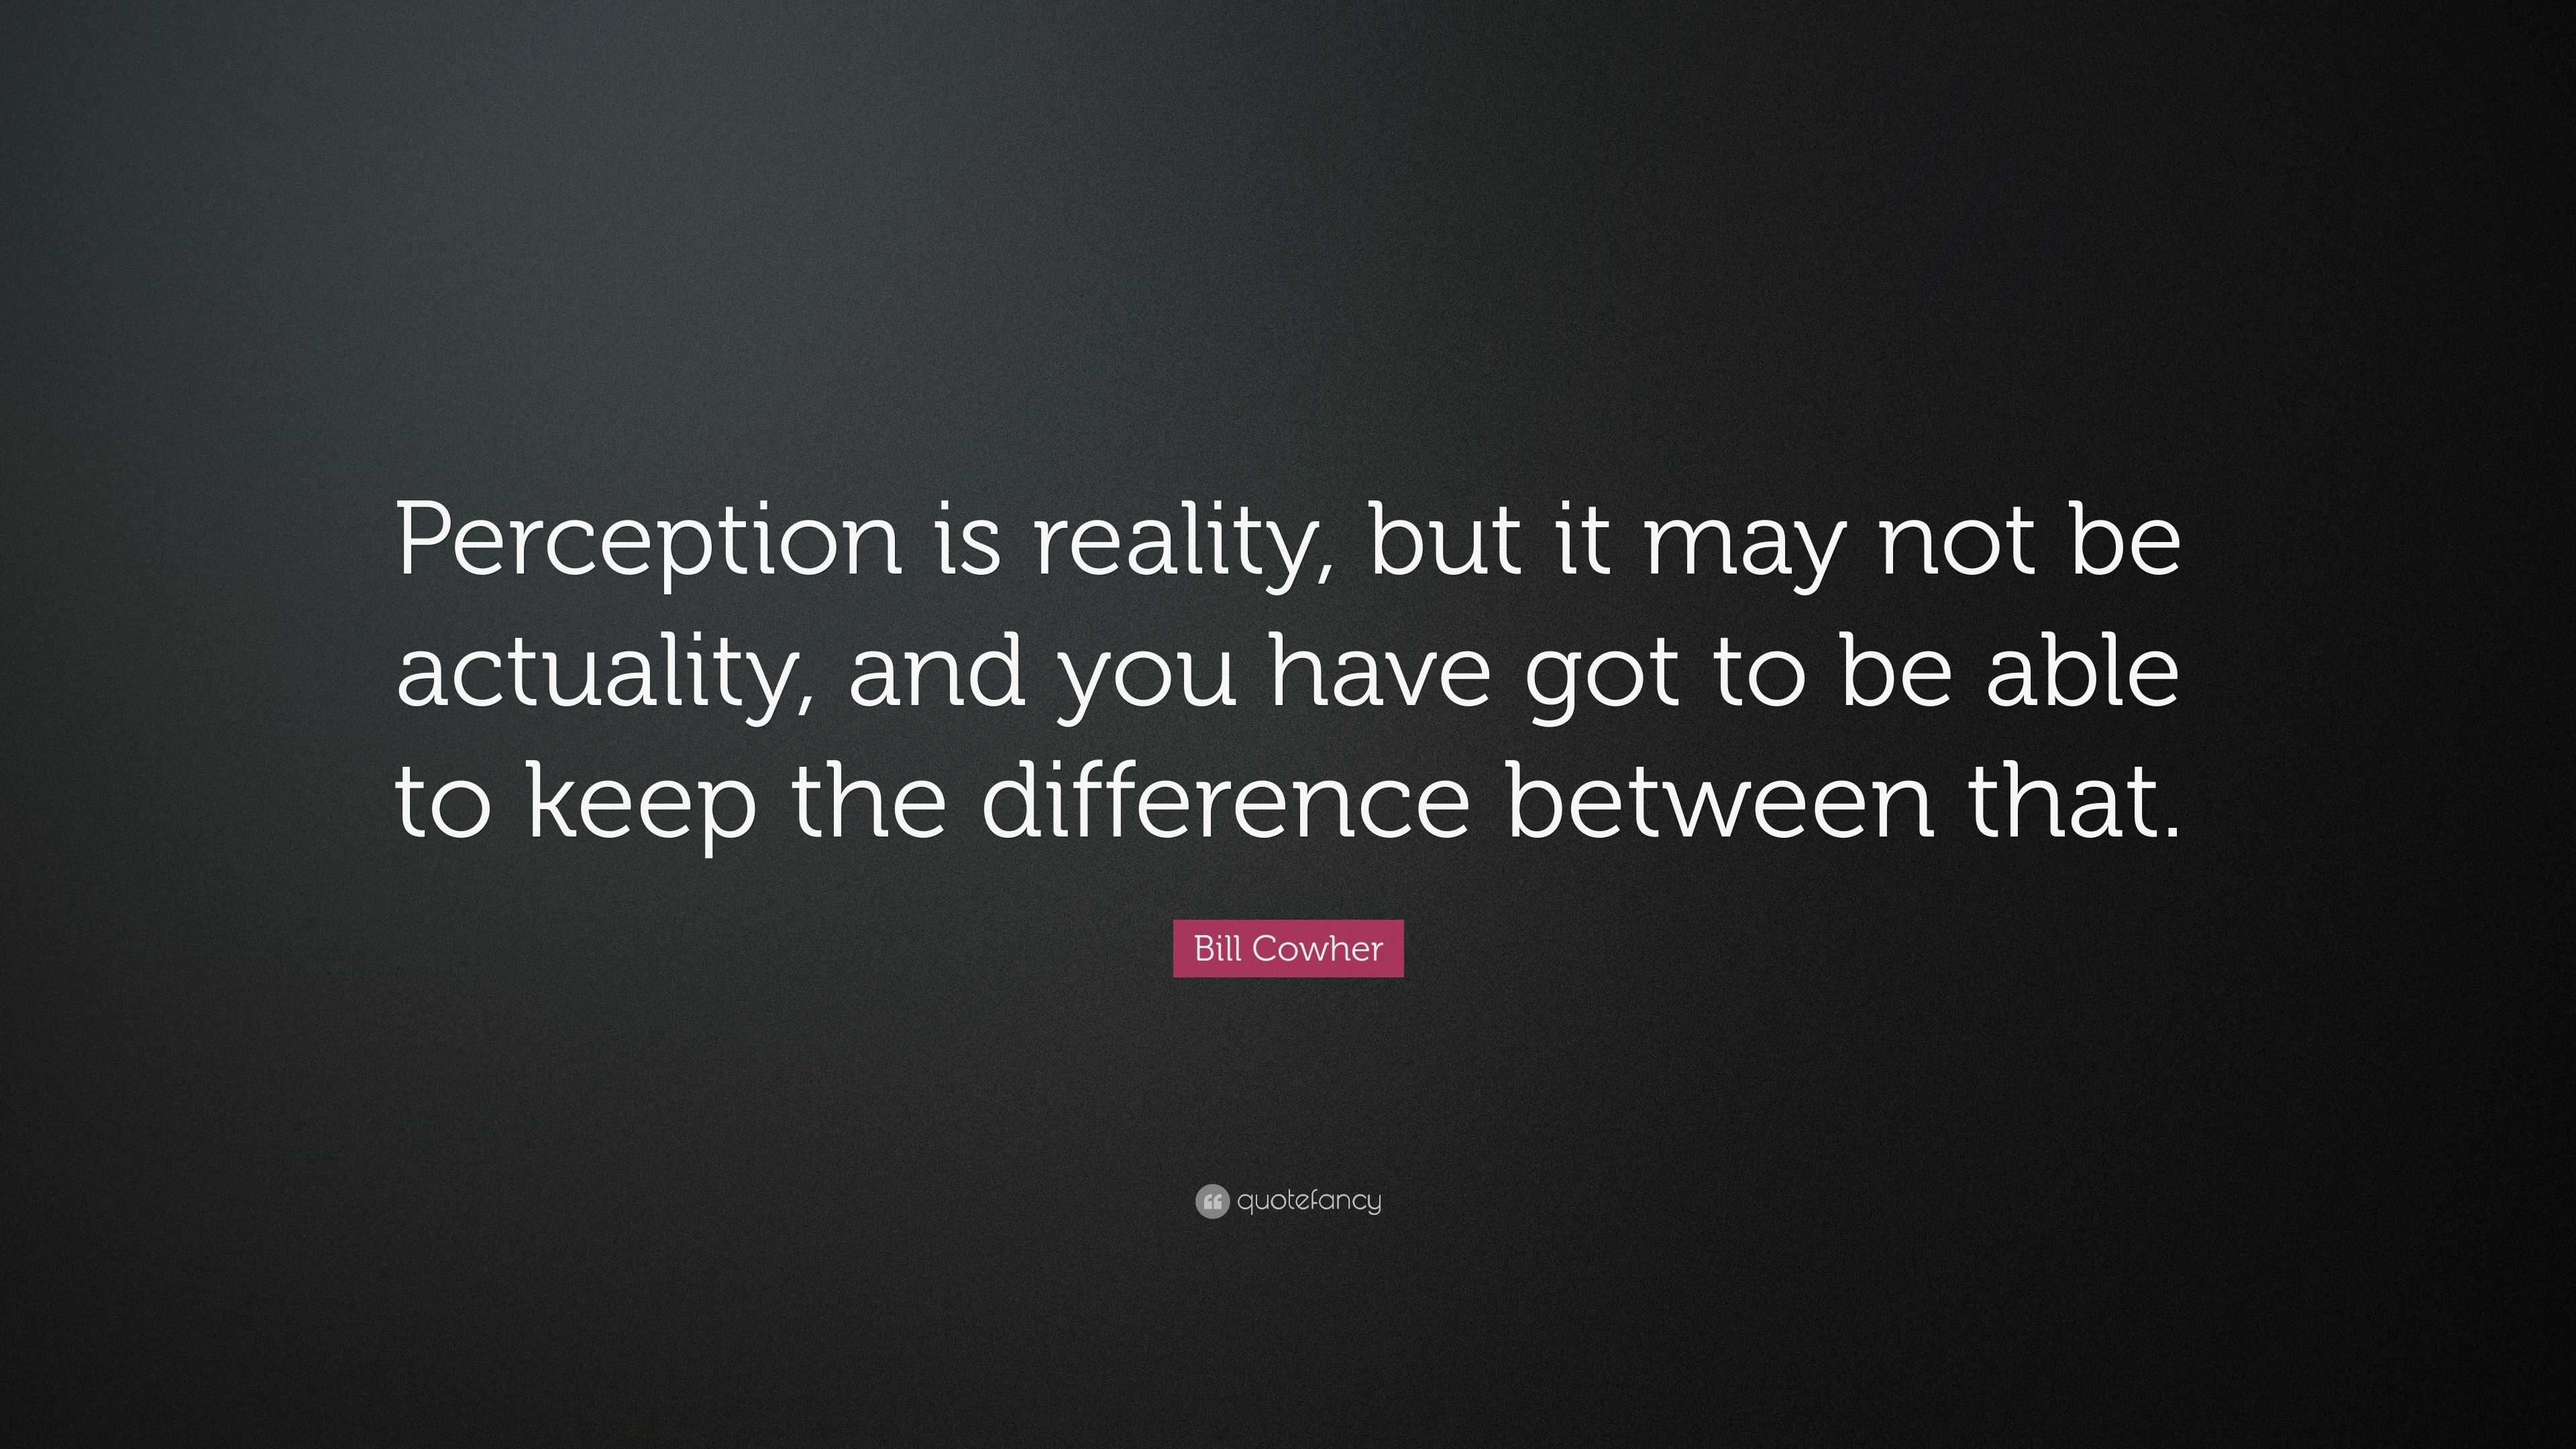 Bill Cowher Quote “Perception is reality, but it may not